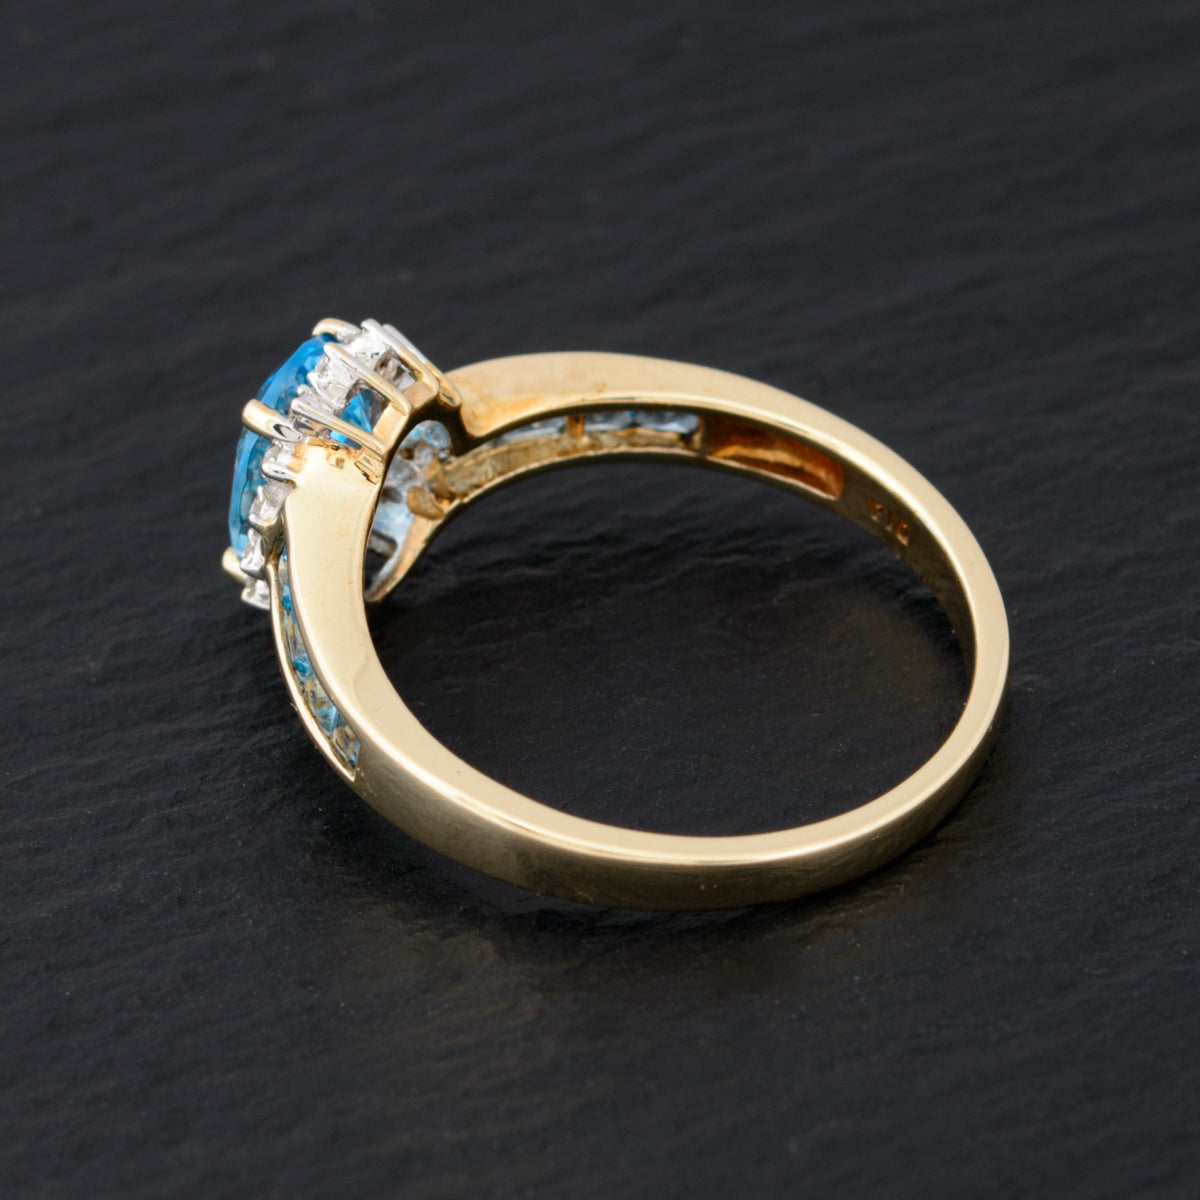 Natural Blue Topaz Gemstone & Diamond Halo Ring In 9ct Gold UK Size R  (A1468)